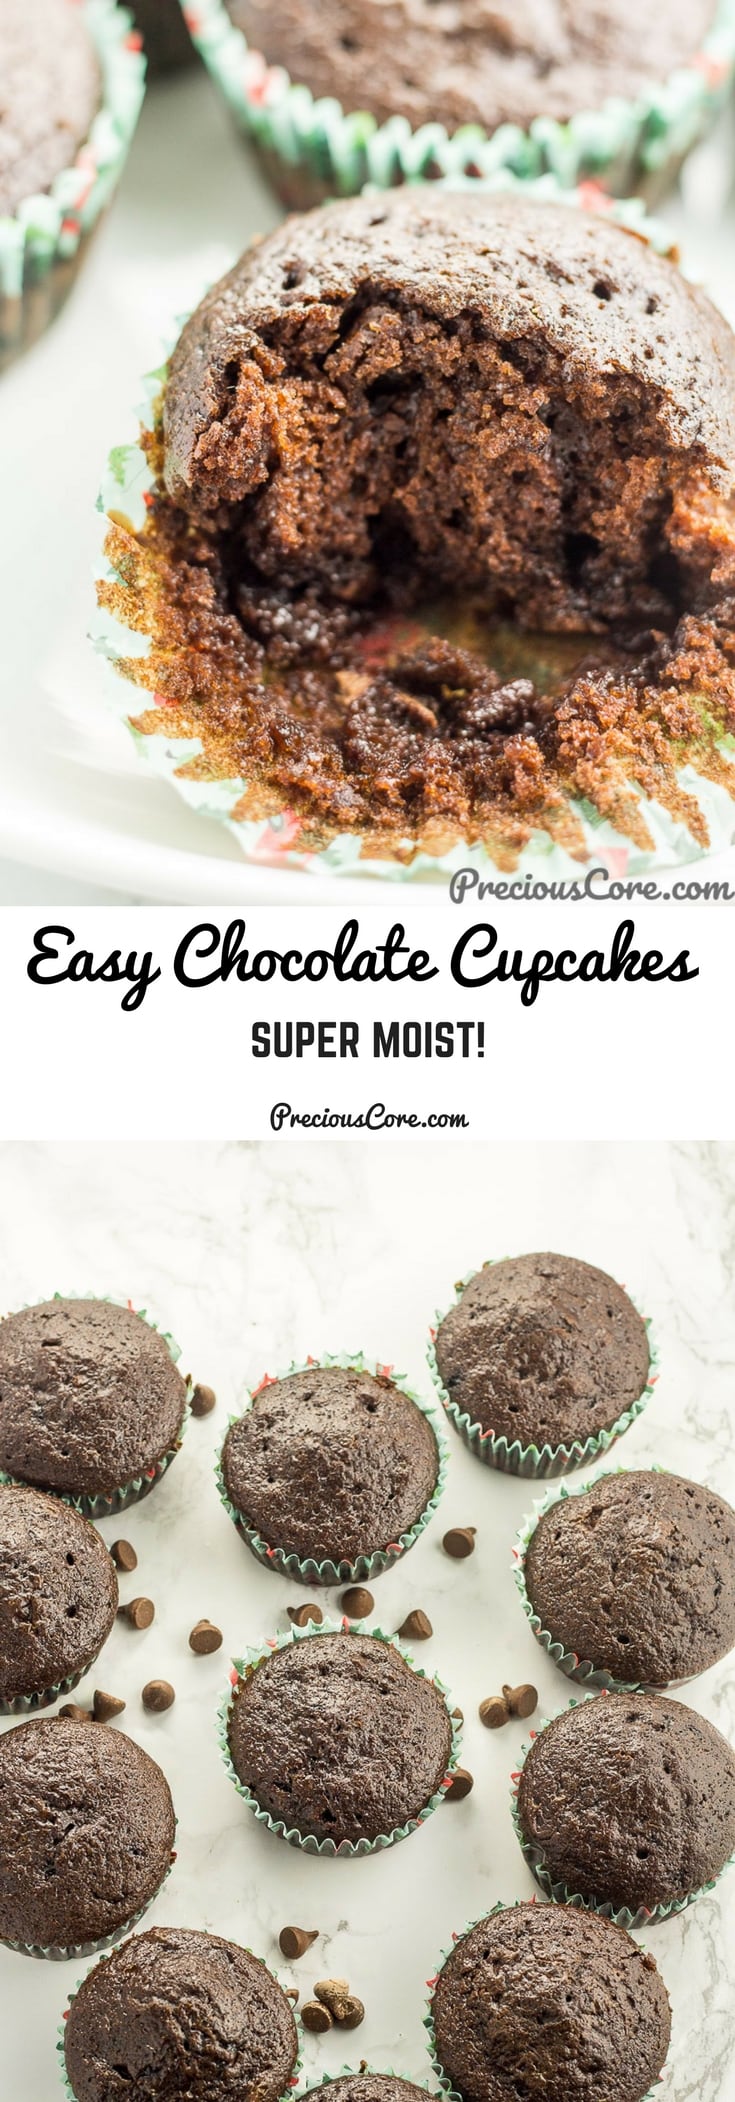 Collage with text \"Easy Chocolate Cupcakes Super Moist!\"